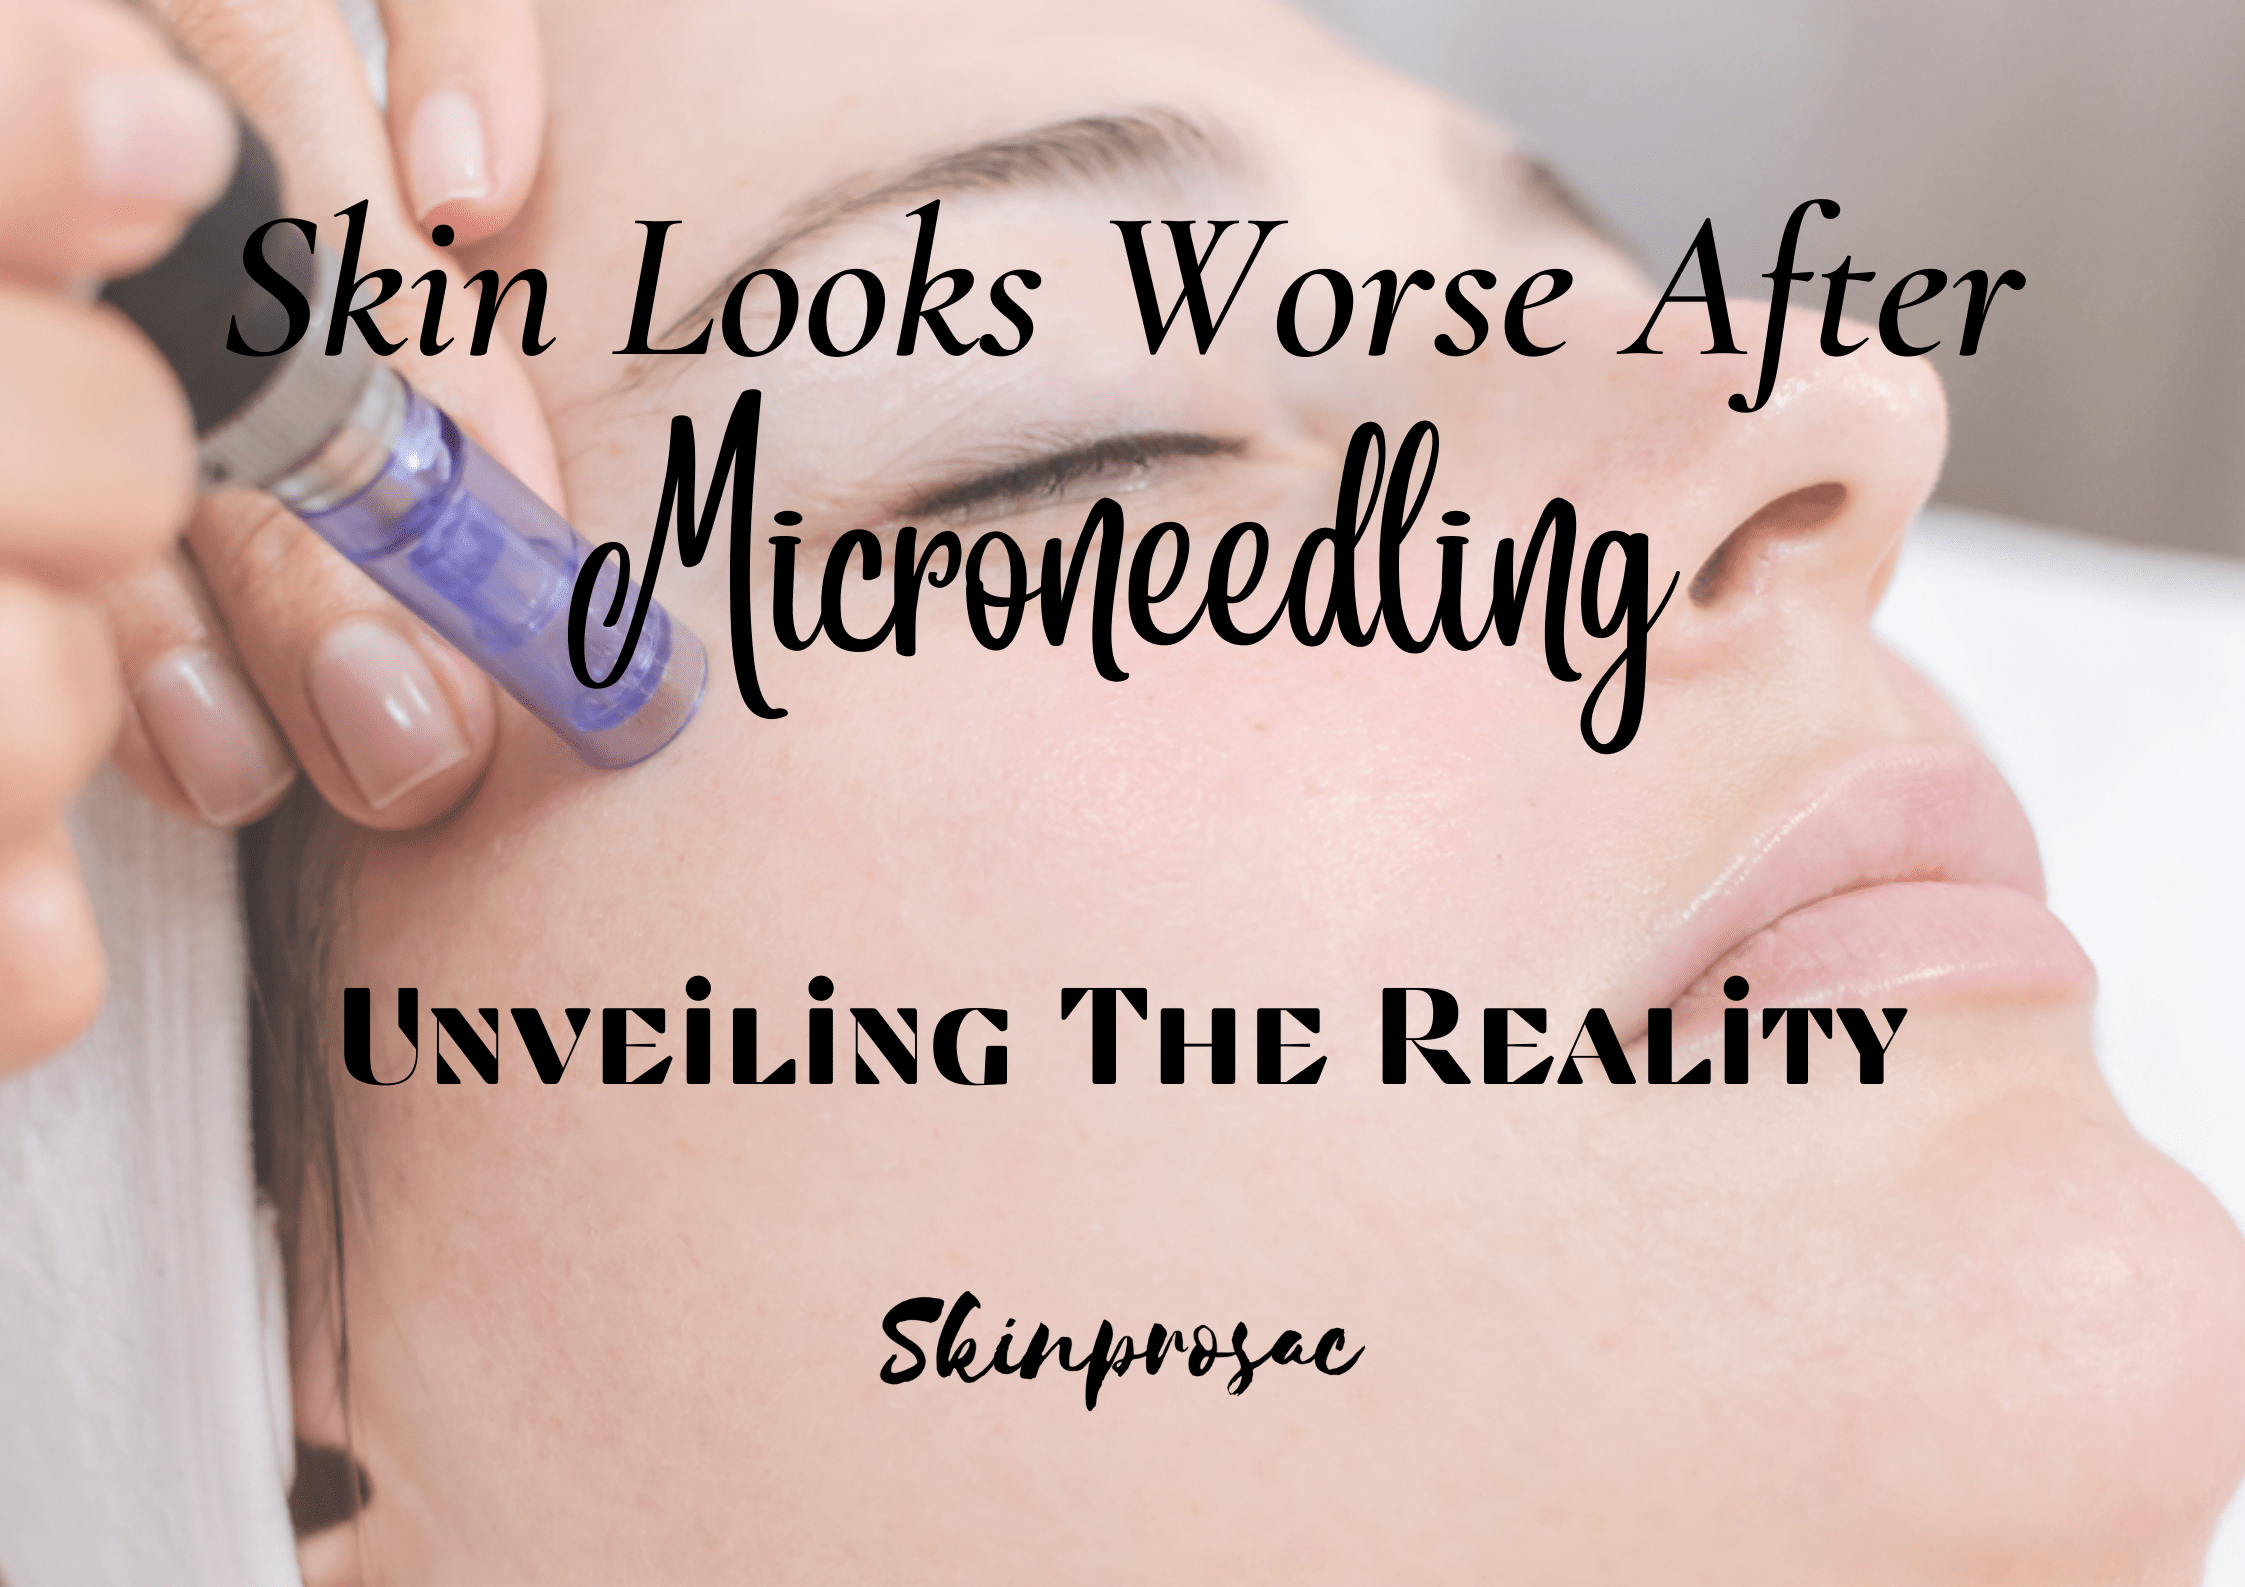 Skin Looks Worse After Microneedling